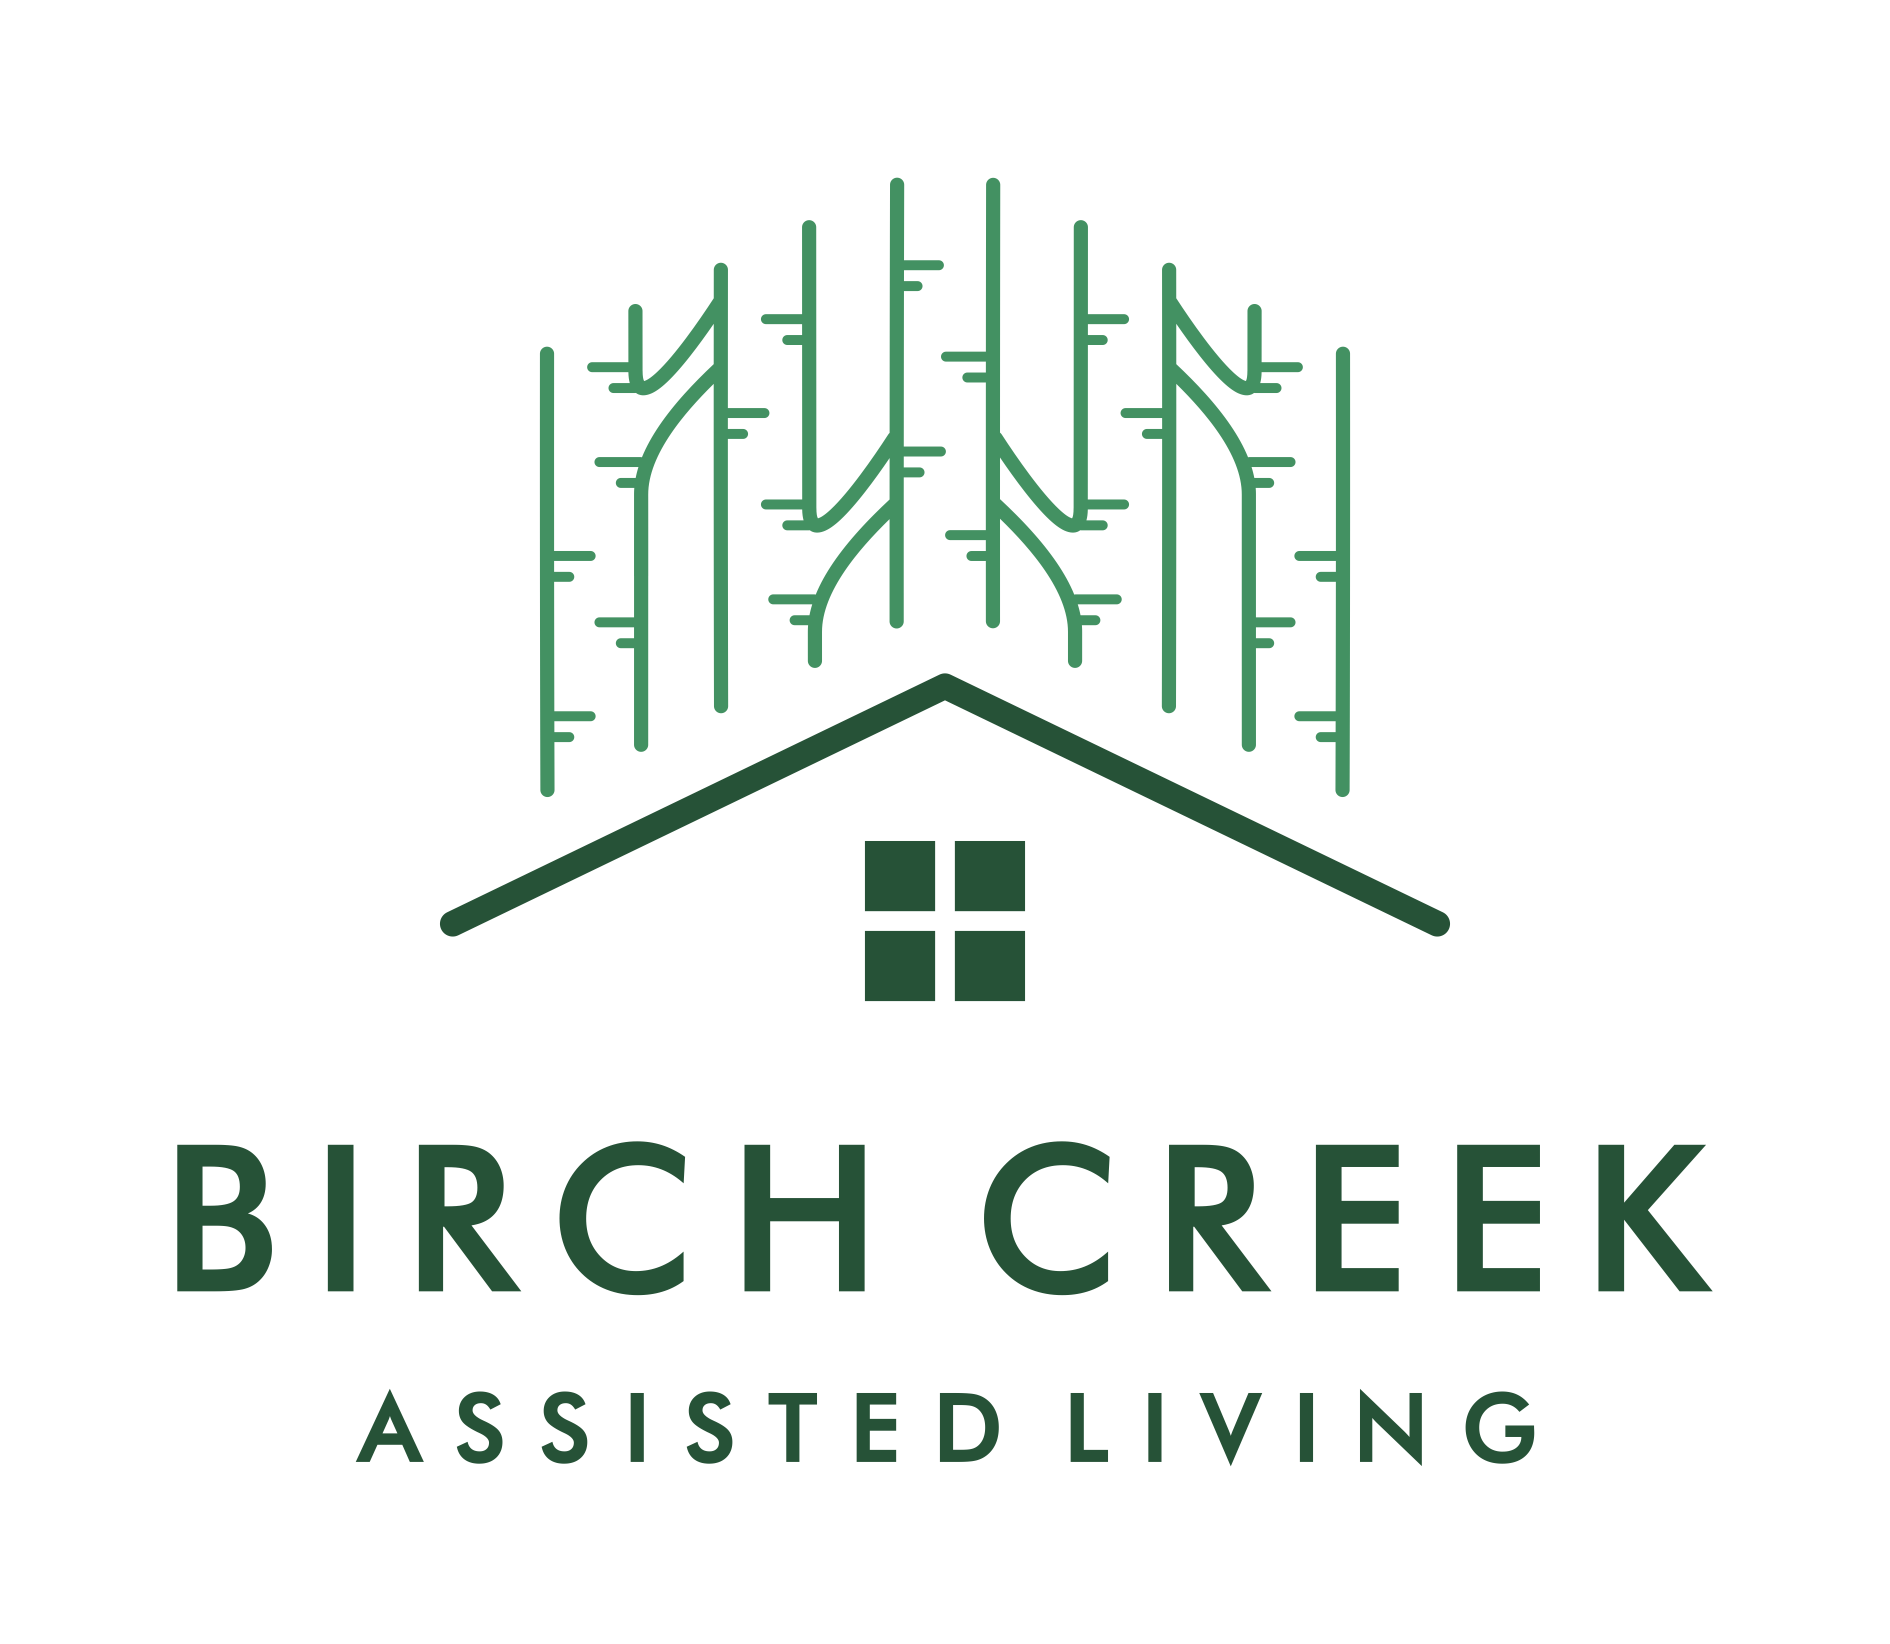 Birch Creek Assisted Living